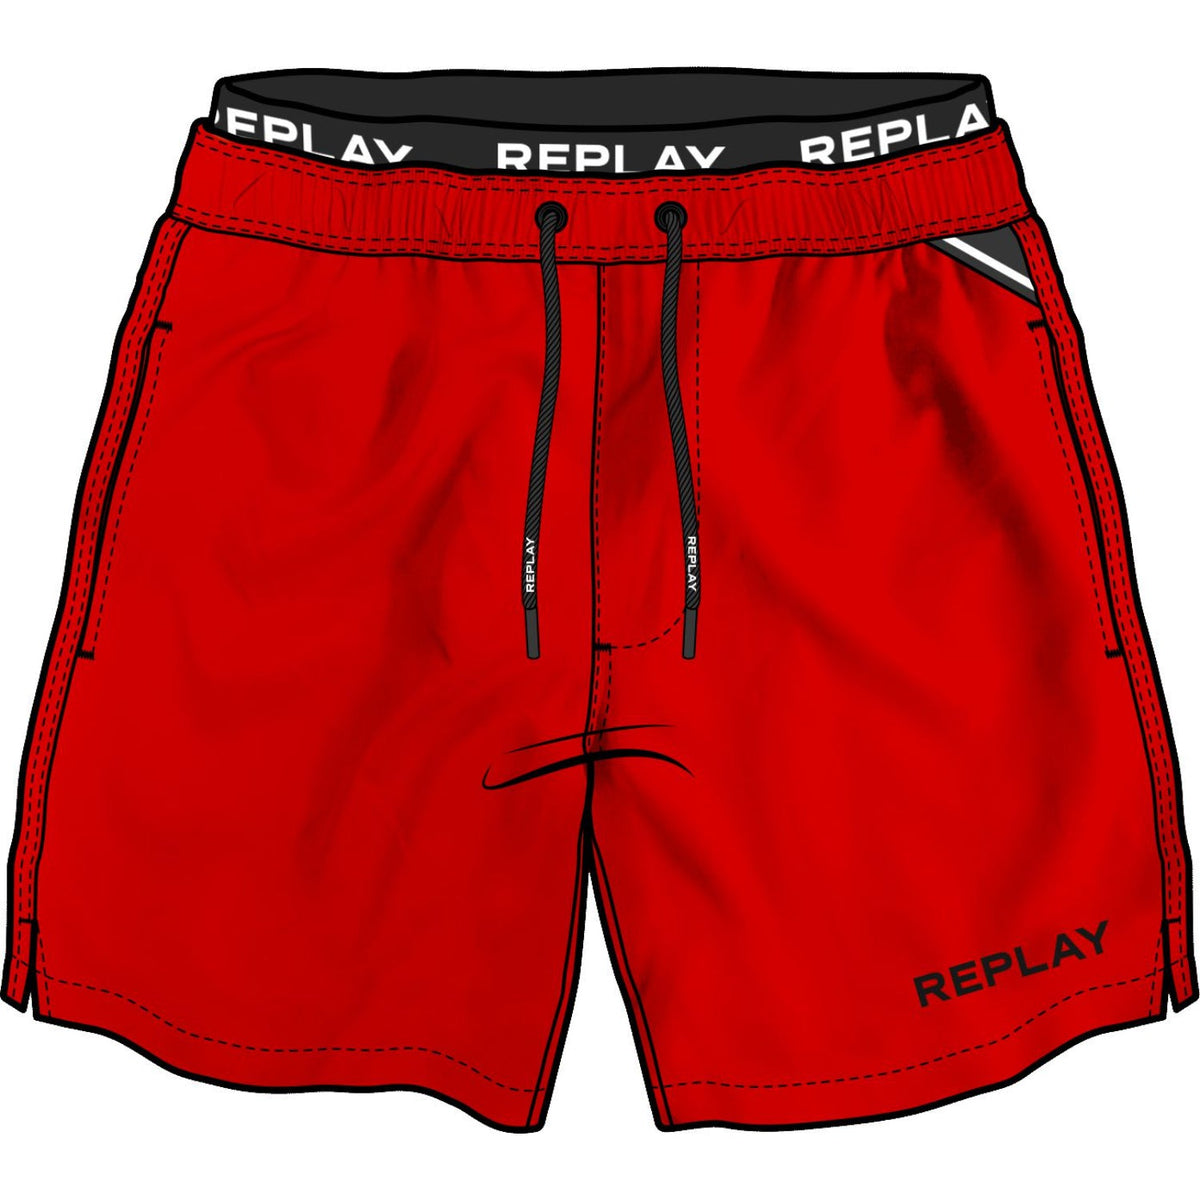 Replay Men's Swimming Trunks with Print